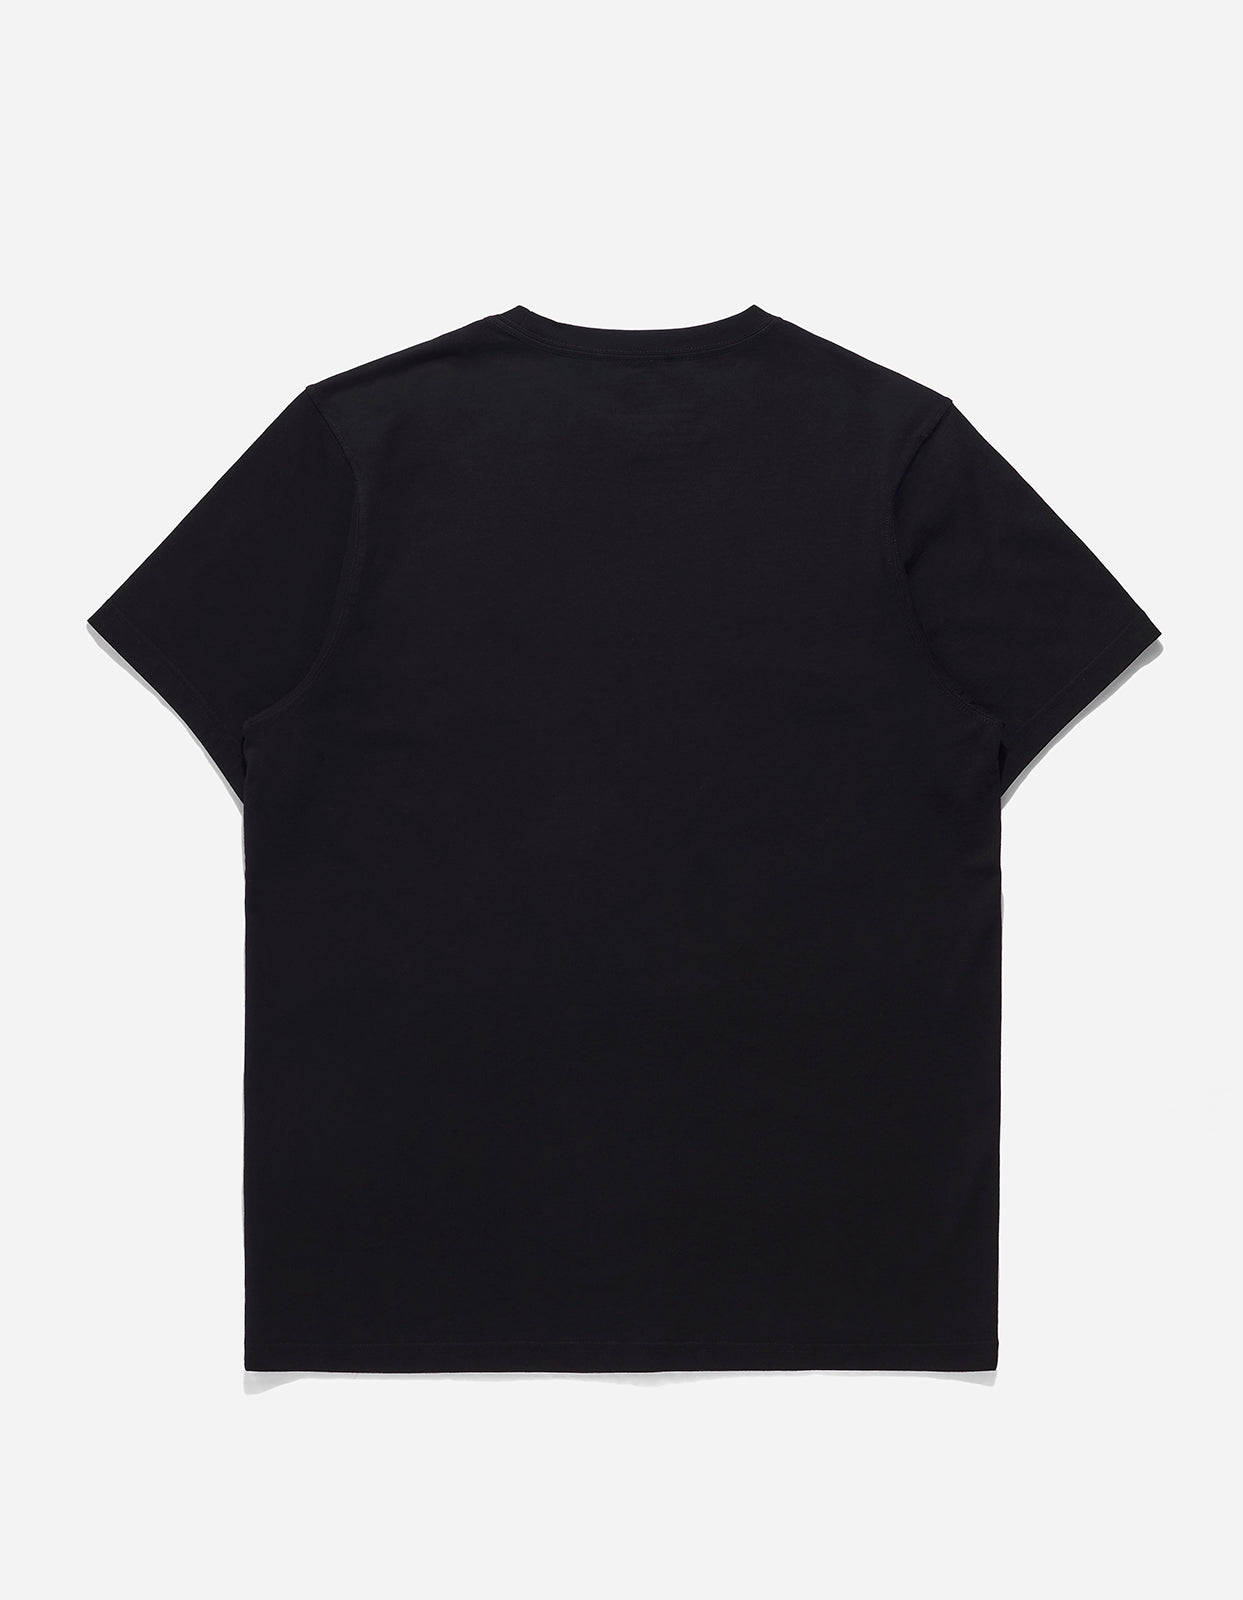 9912 MILTYPE Embroidered T-Shirt Black